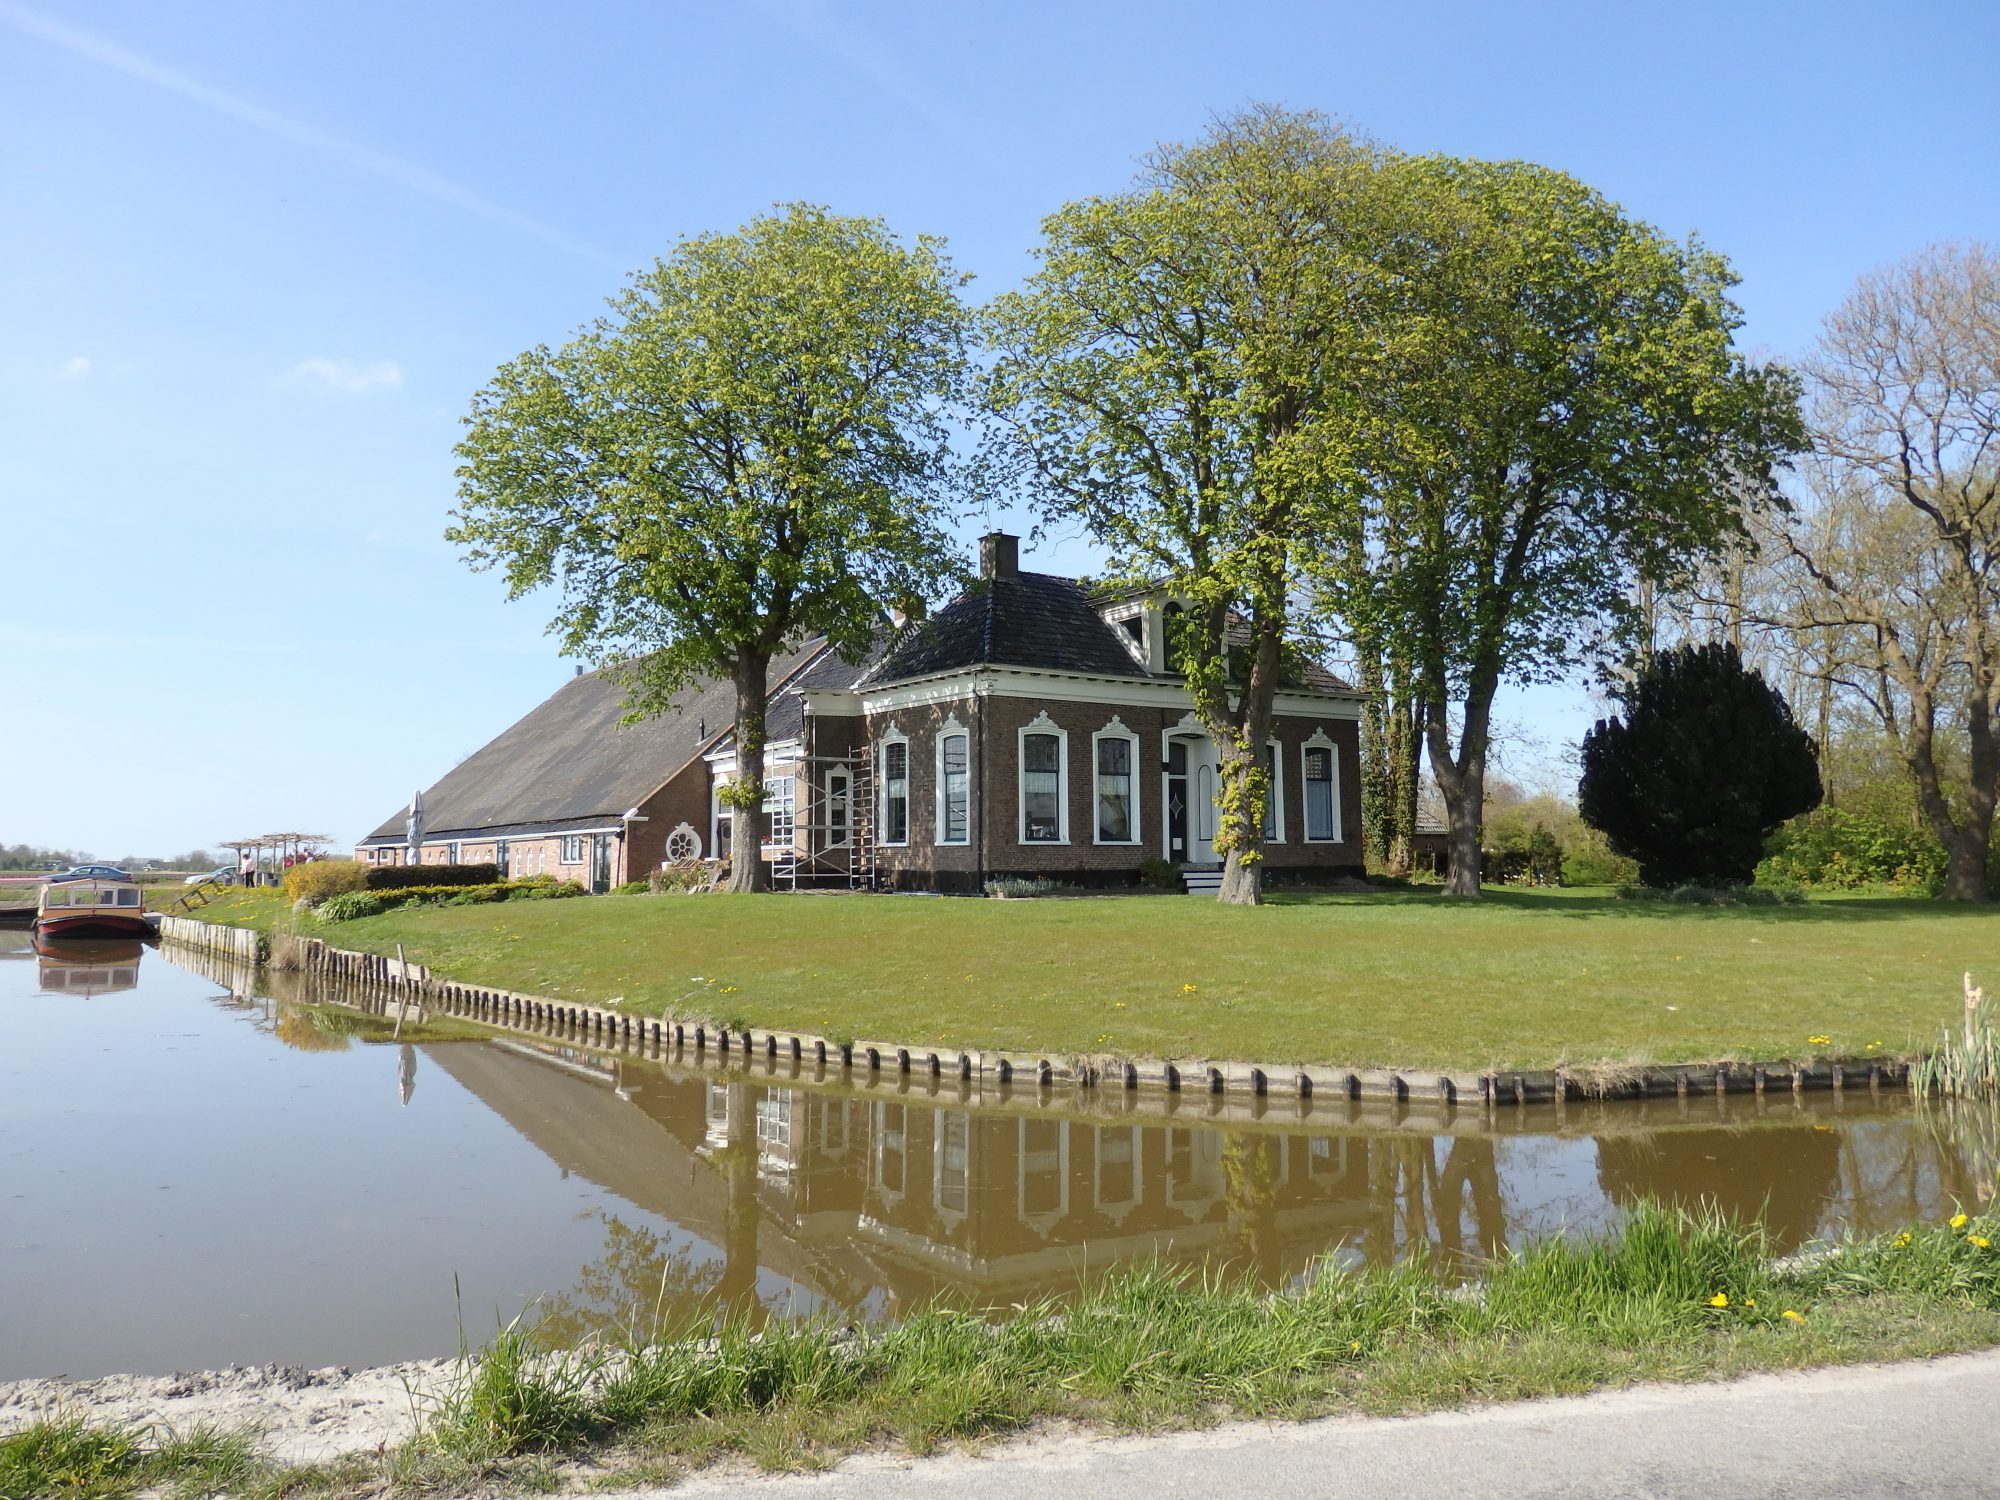 a farmhouse Groningen province. The barn end has been converted to a restaurant of some sort.